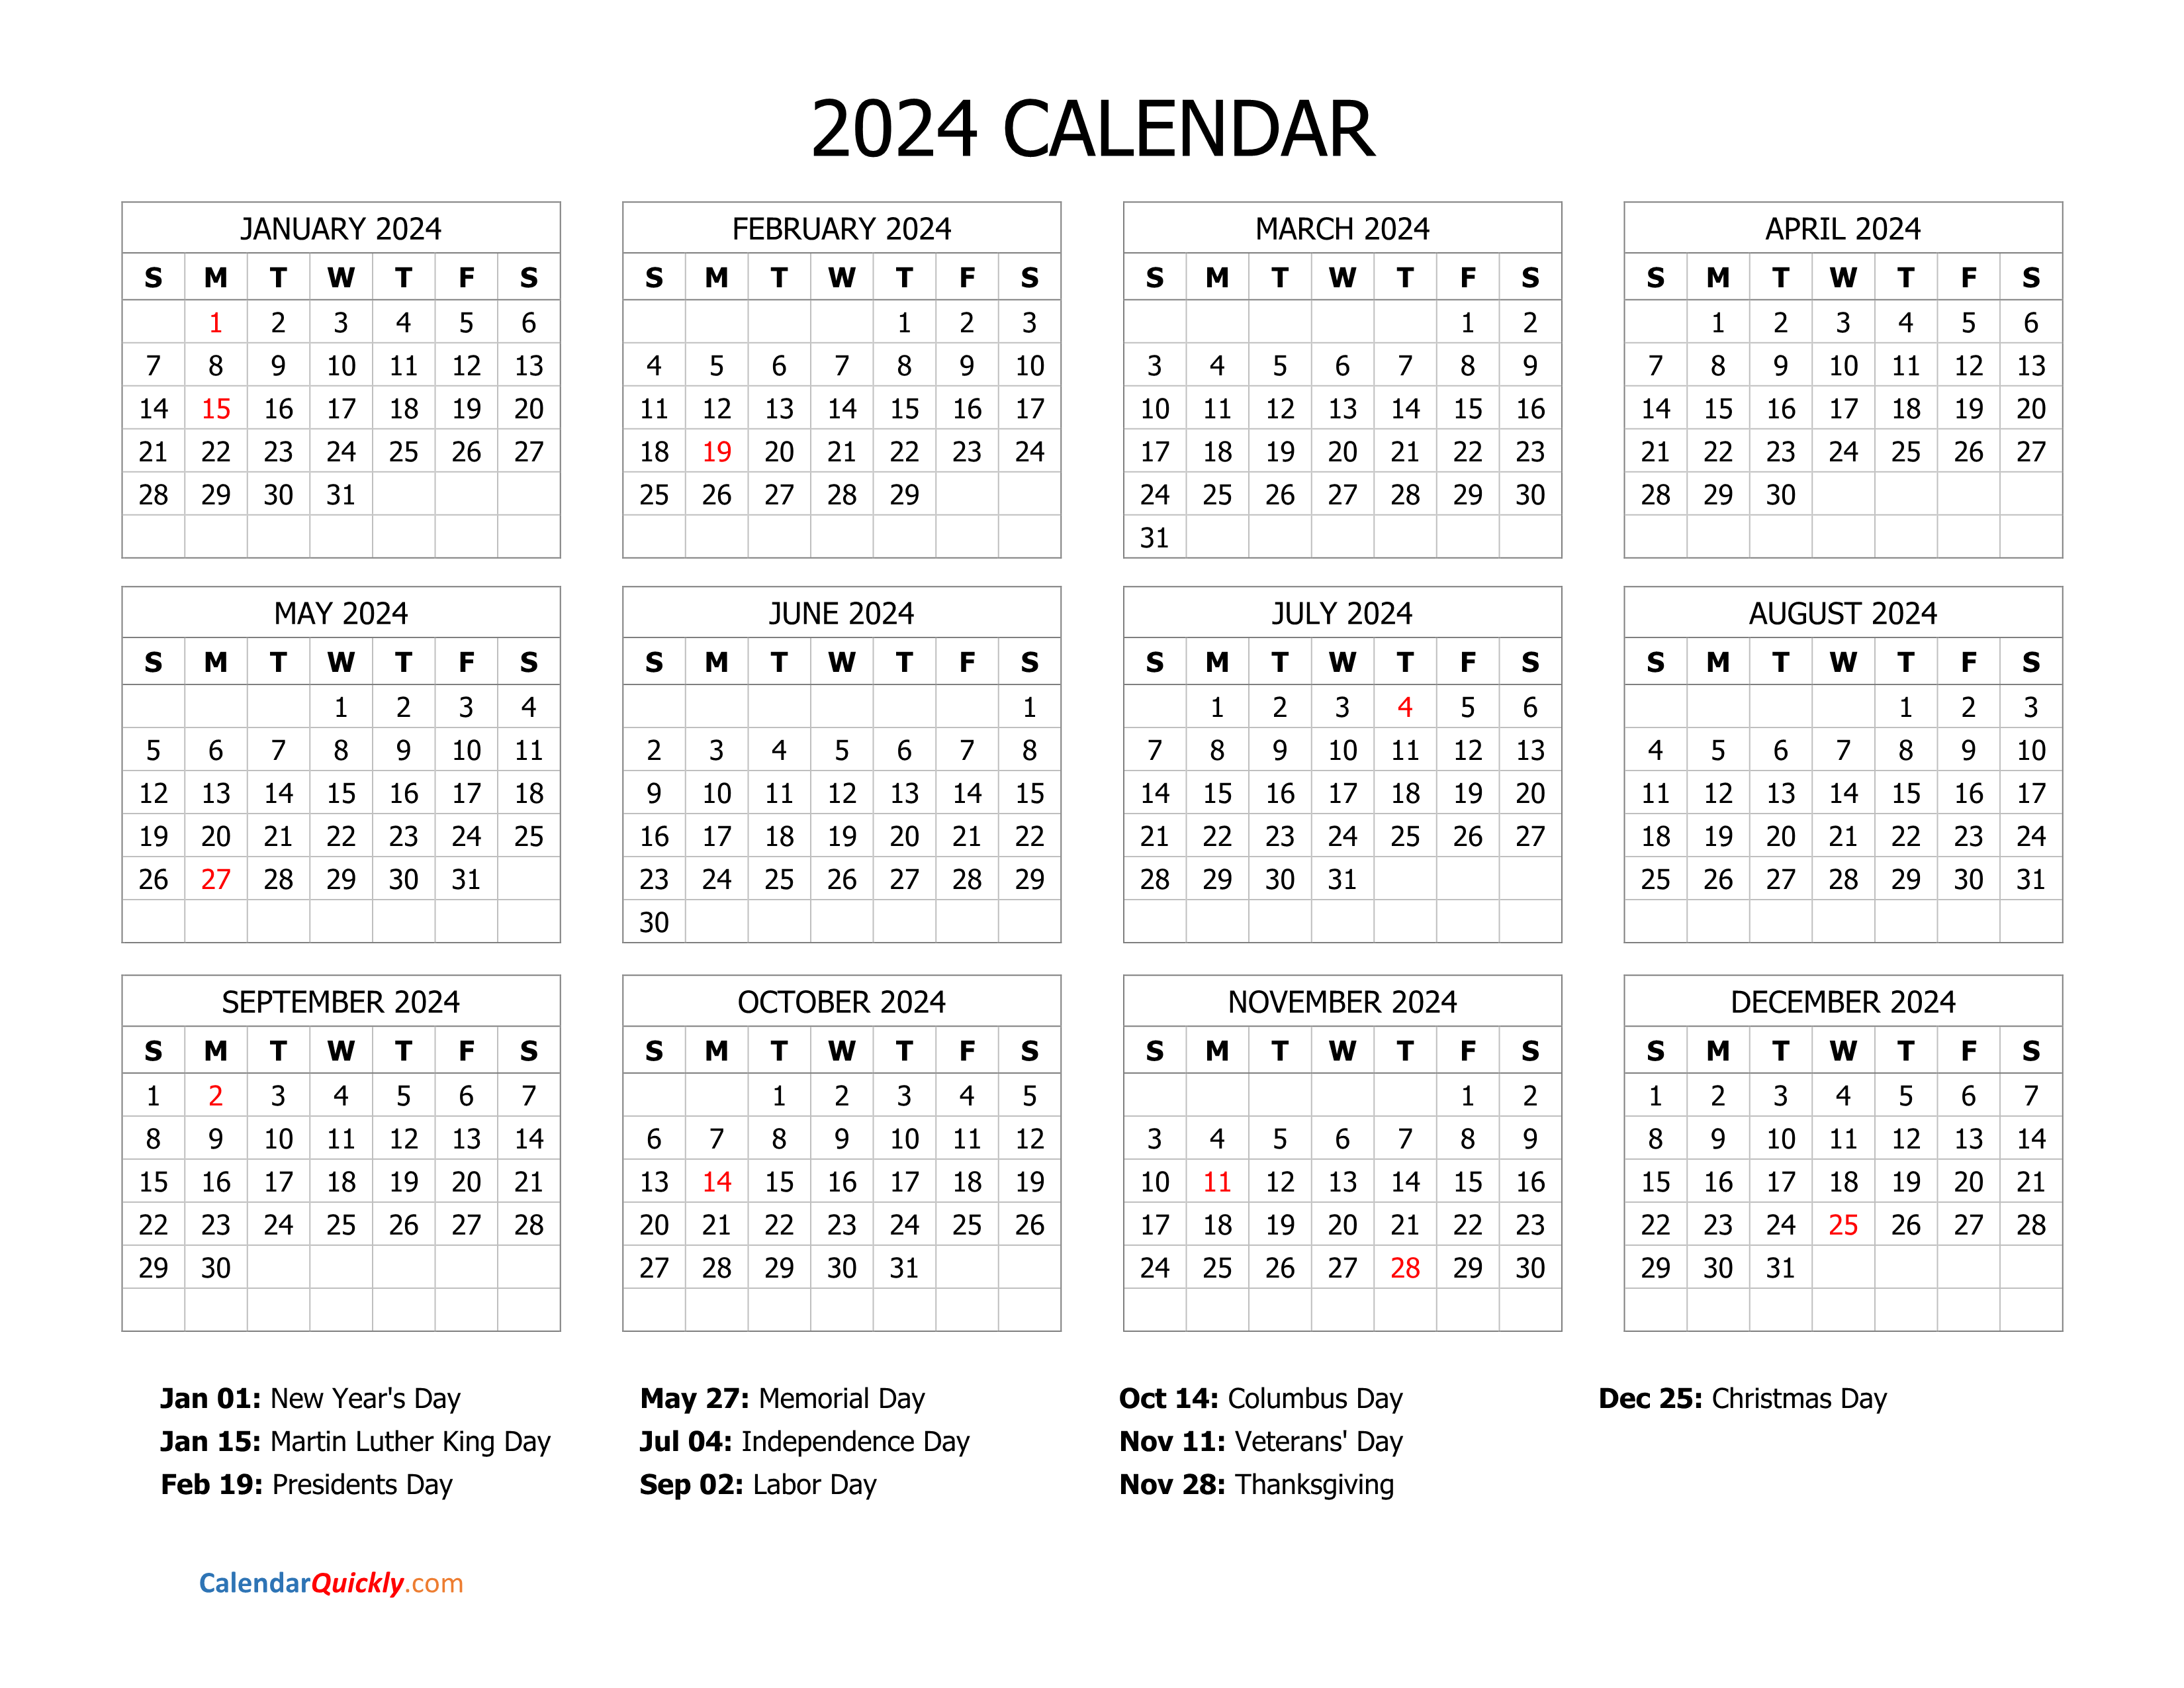 Printable Calendar 2024 With Holidays - Free Printable 2024 Calendar In Word Format